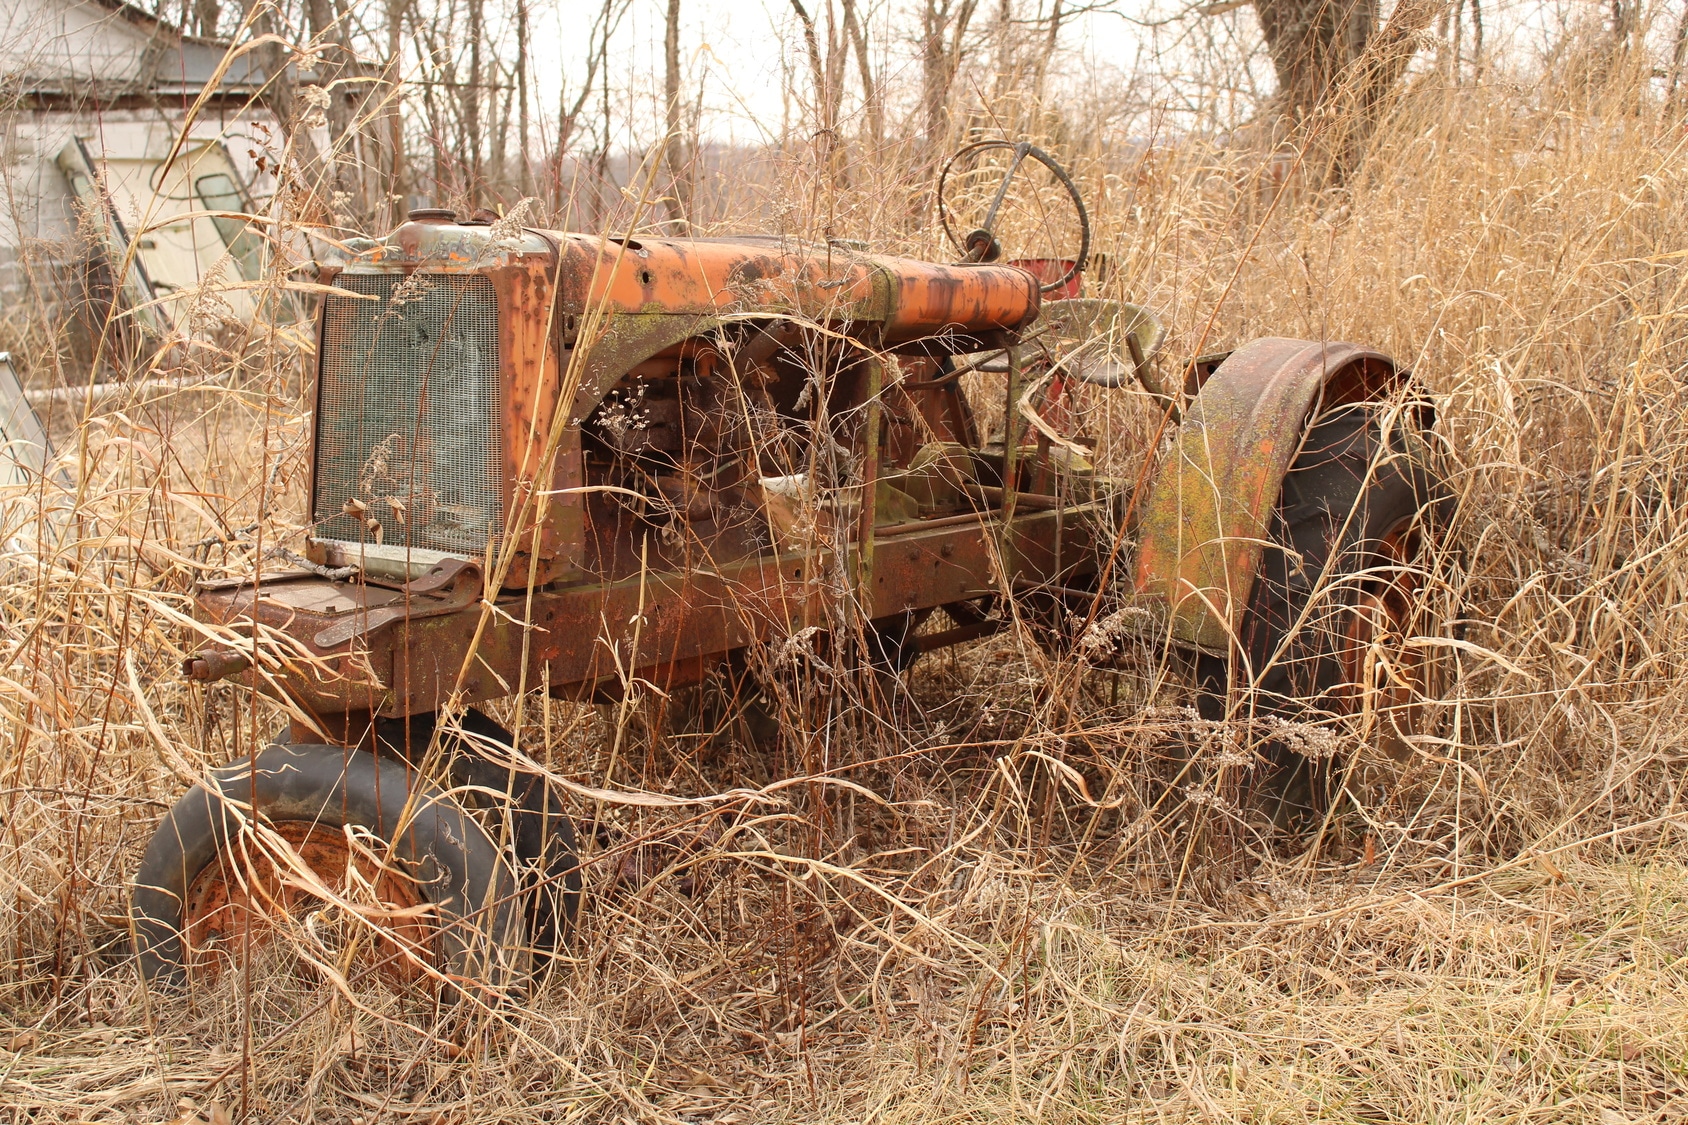 image of vintage tractor that can be recycling with leading scrap metal recycling company in IL